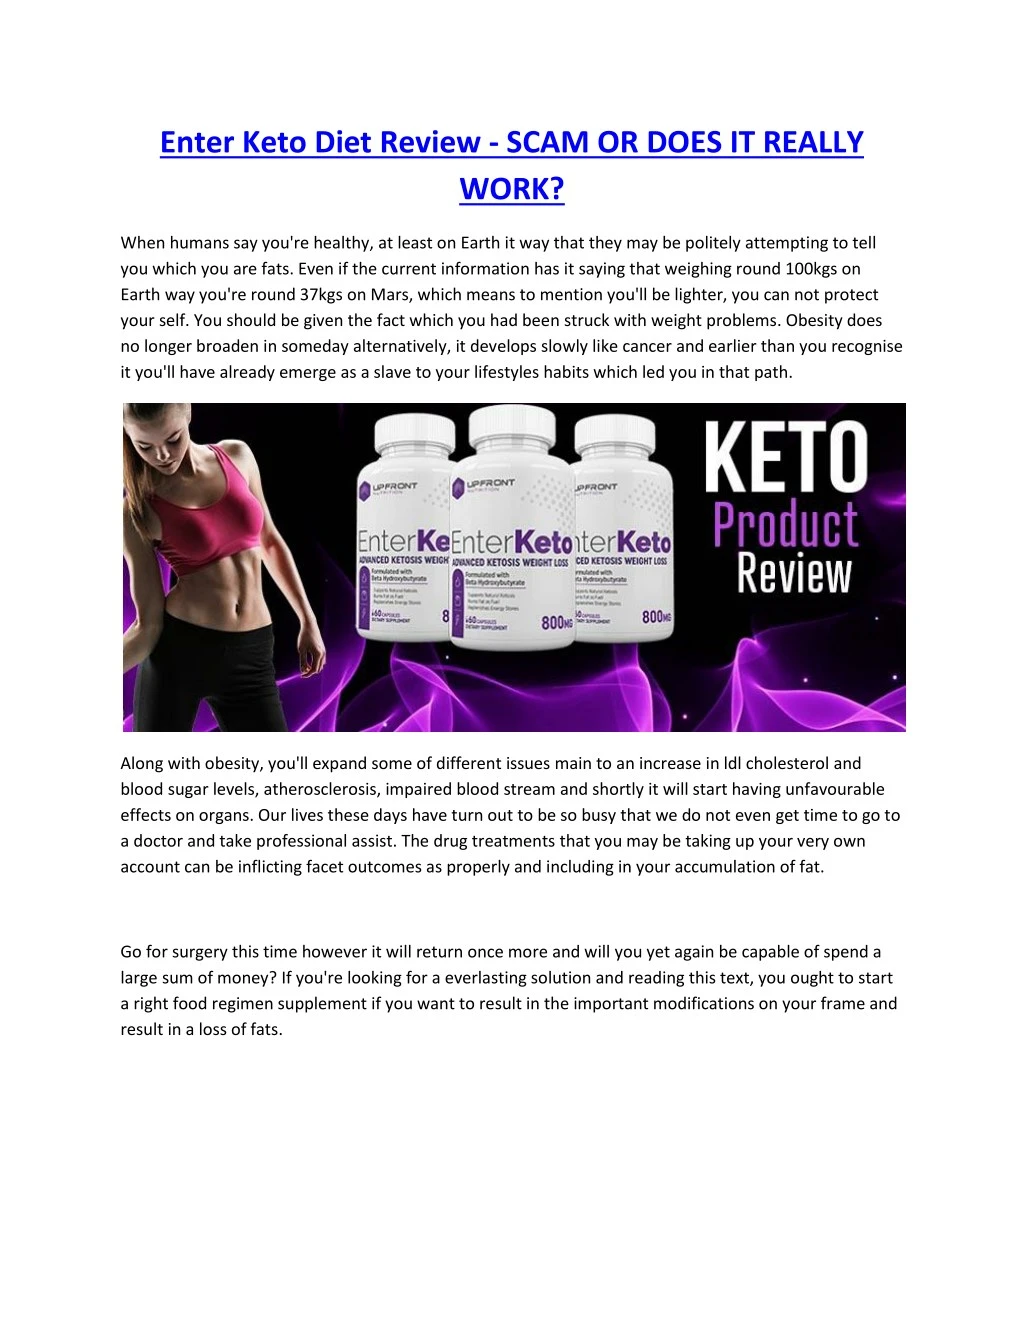 enter keto diet review scam or does it really work